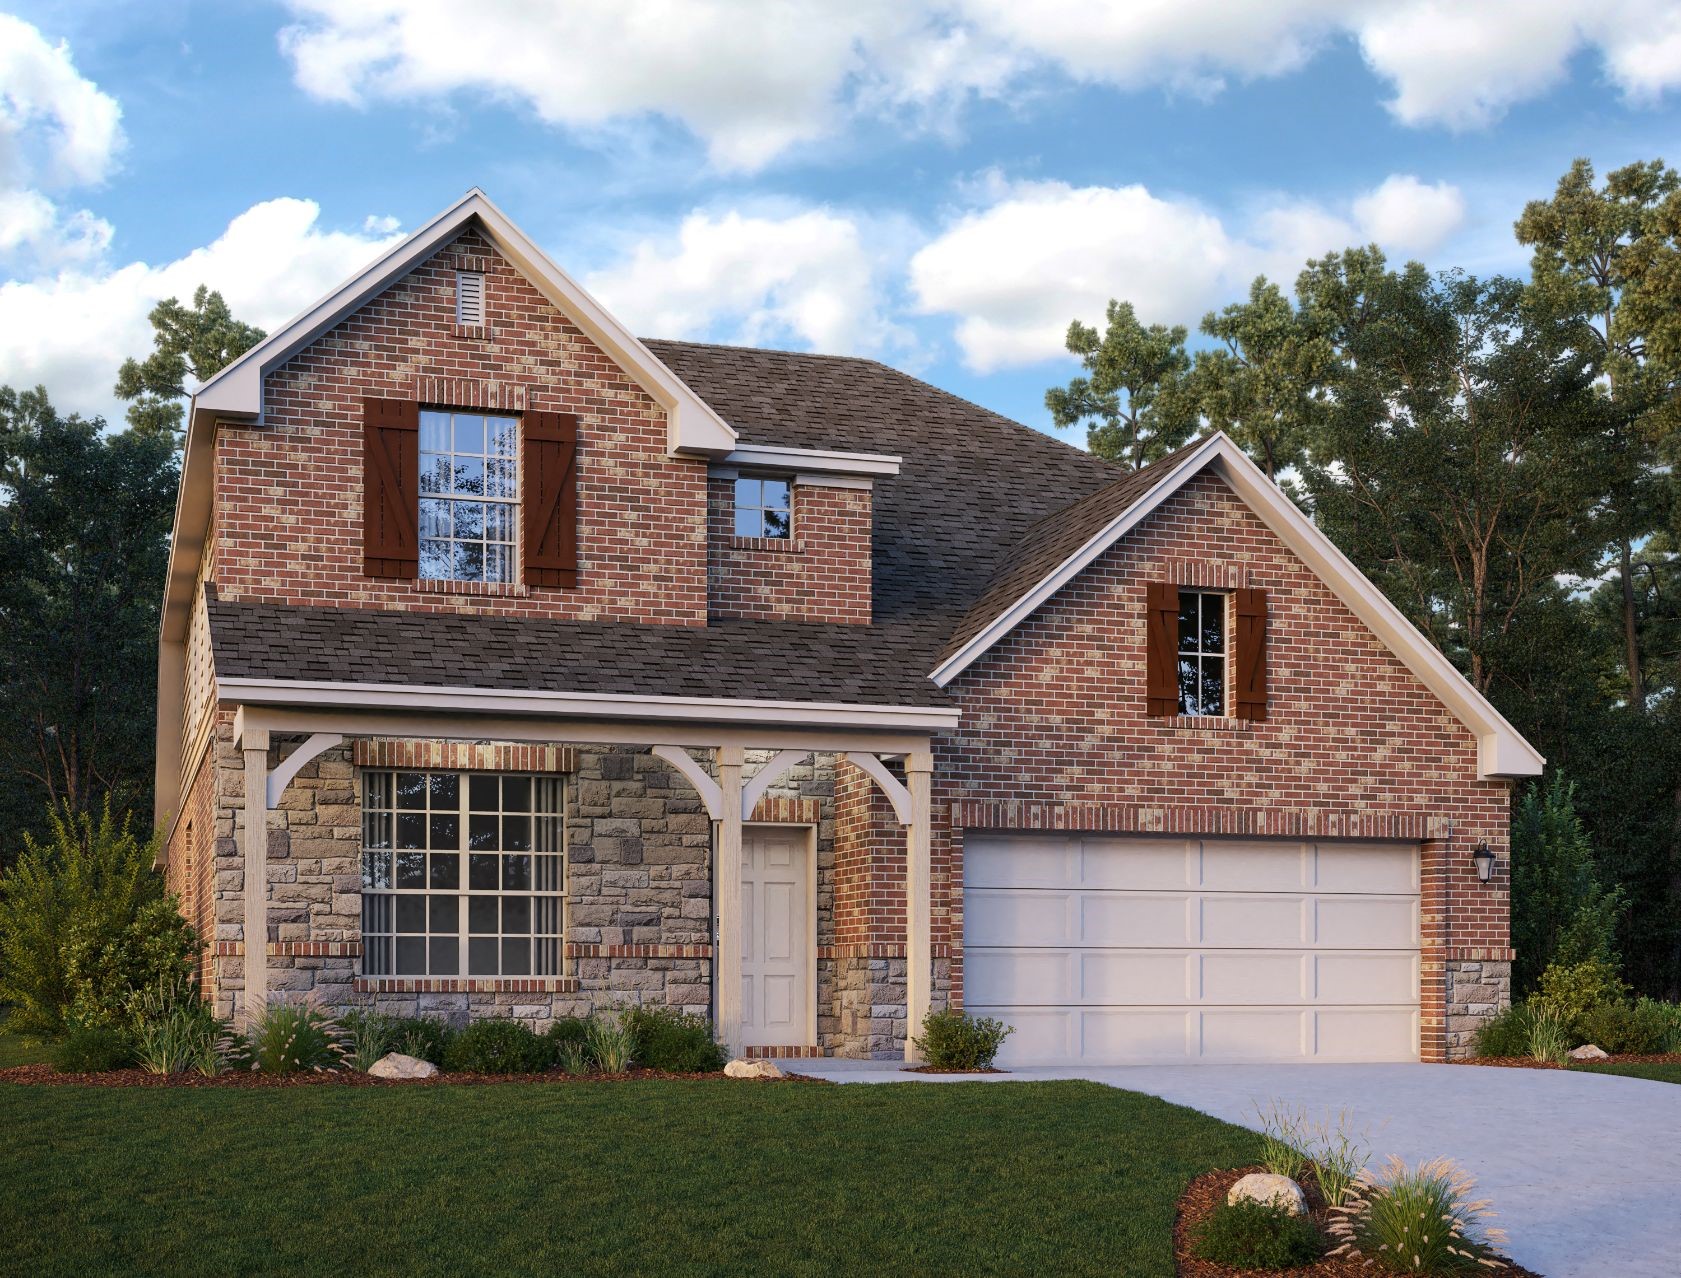 Welcome home to 21426 Loblolly View Lane located in the Oakwood Estates community zoned to Waller ISD.